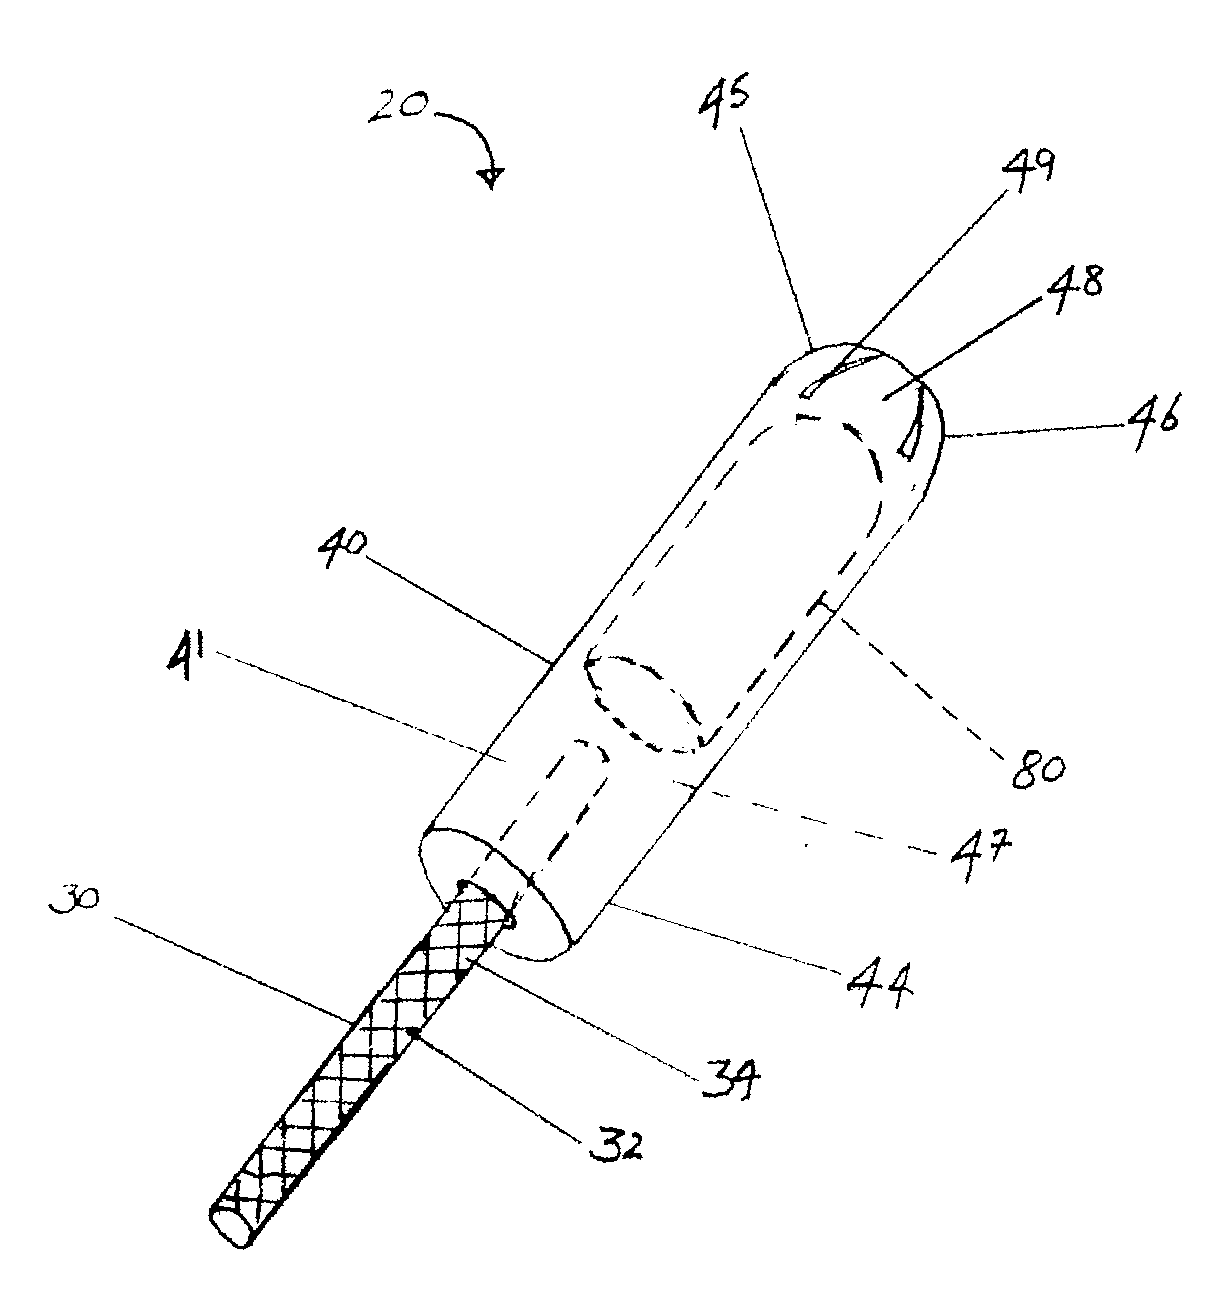 Applicator having plunger with gripping elements